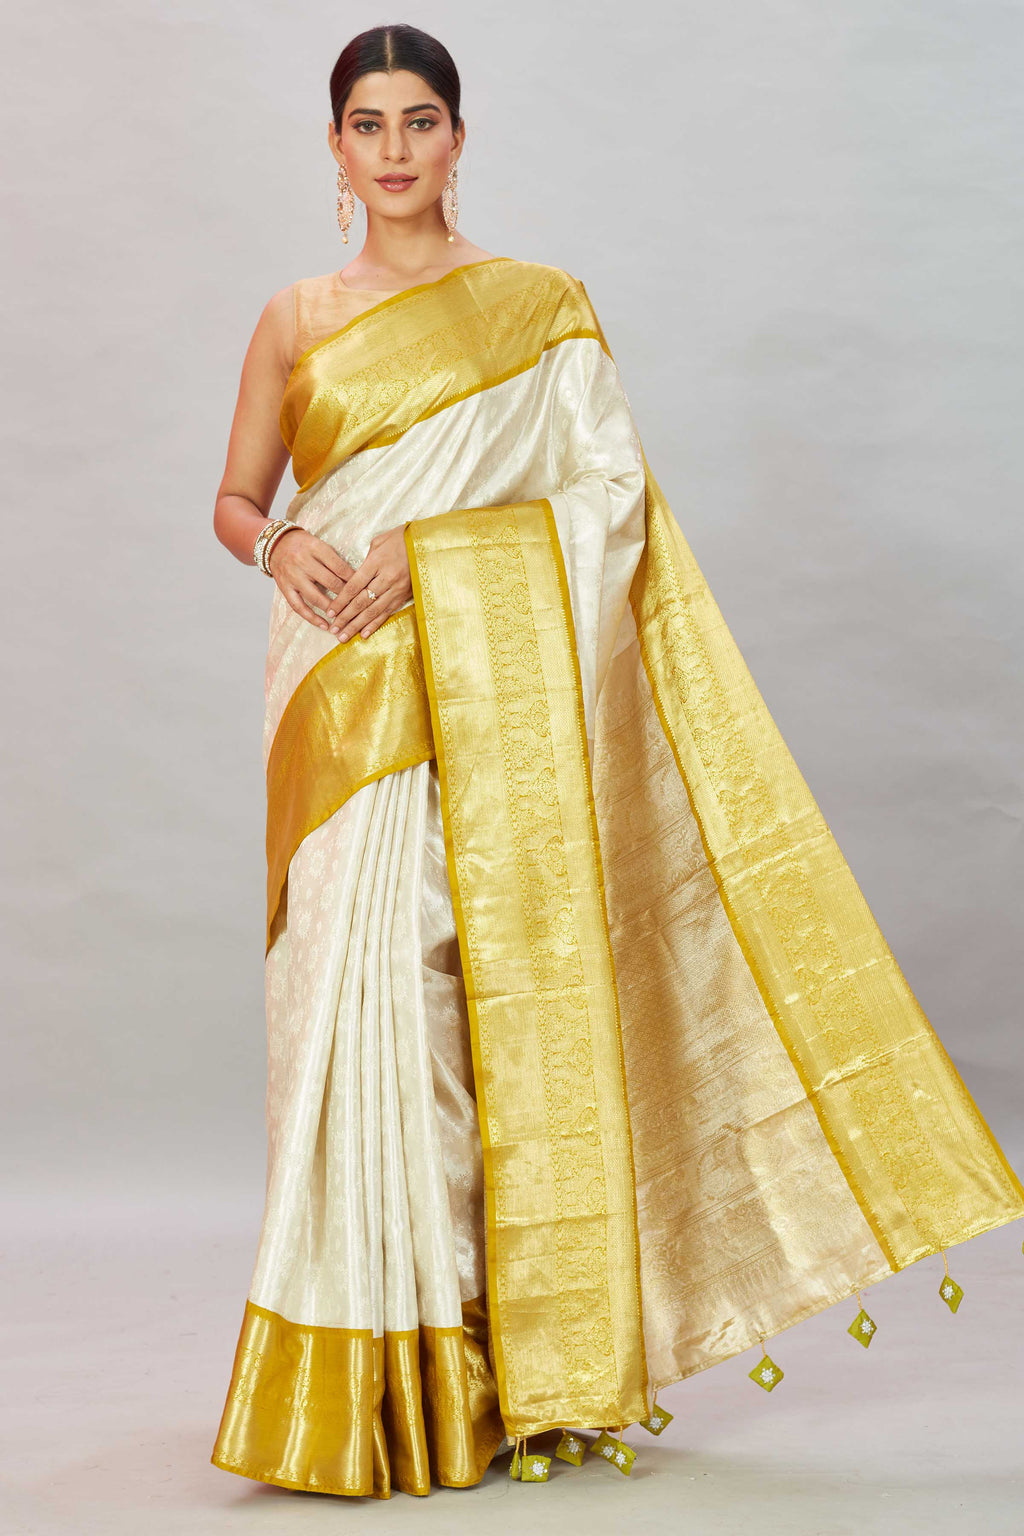 Shop cream Kanjivaram silk sari online in USA with golden zari border. Look your best on festive occasions in latest designer sarees, pure silk sarees, Kanjivaram silk saris, handwoven saris, tussar silk sarees, embroidered saris from Pure Elegance Indian clothing store in USA.-full view